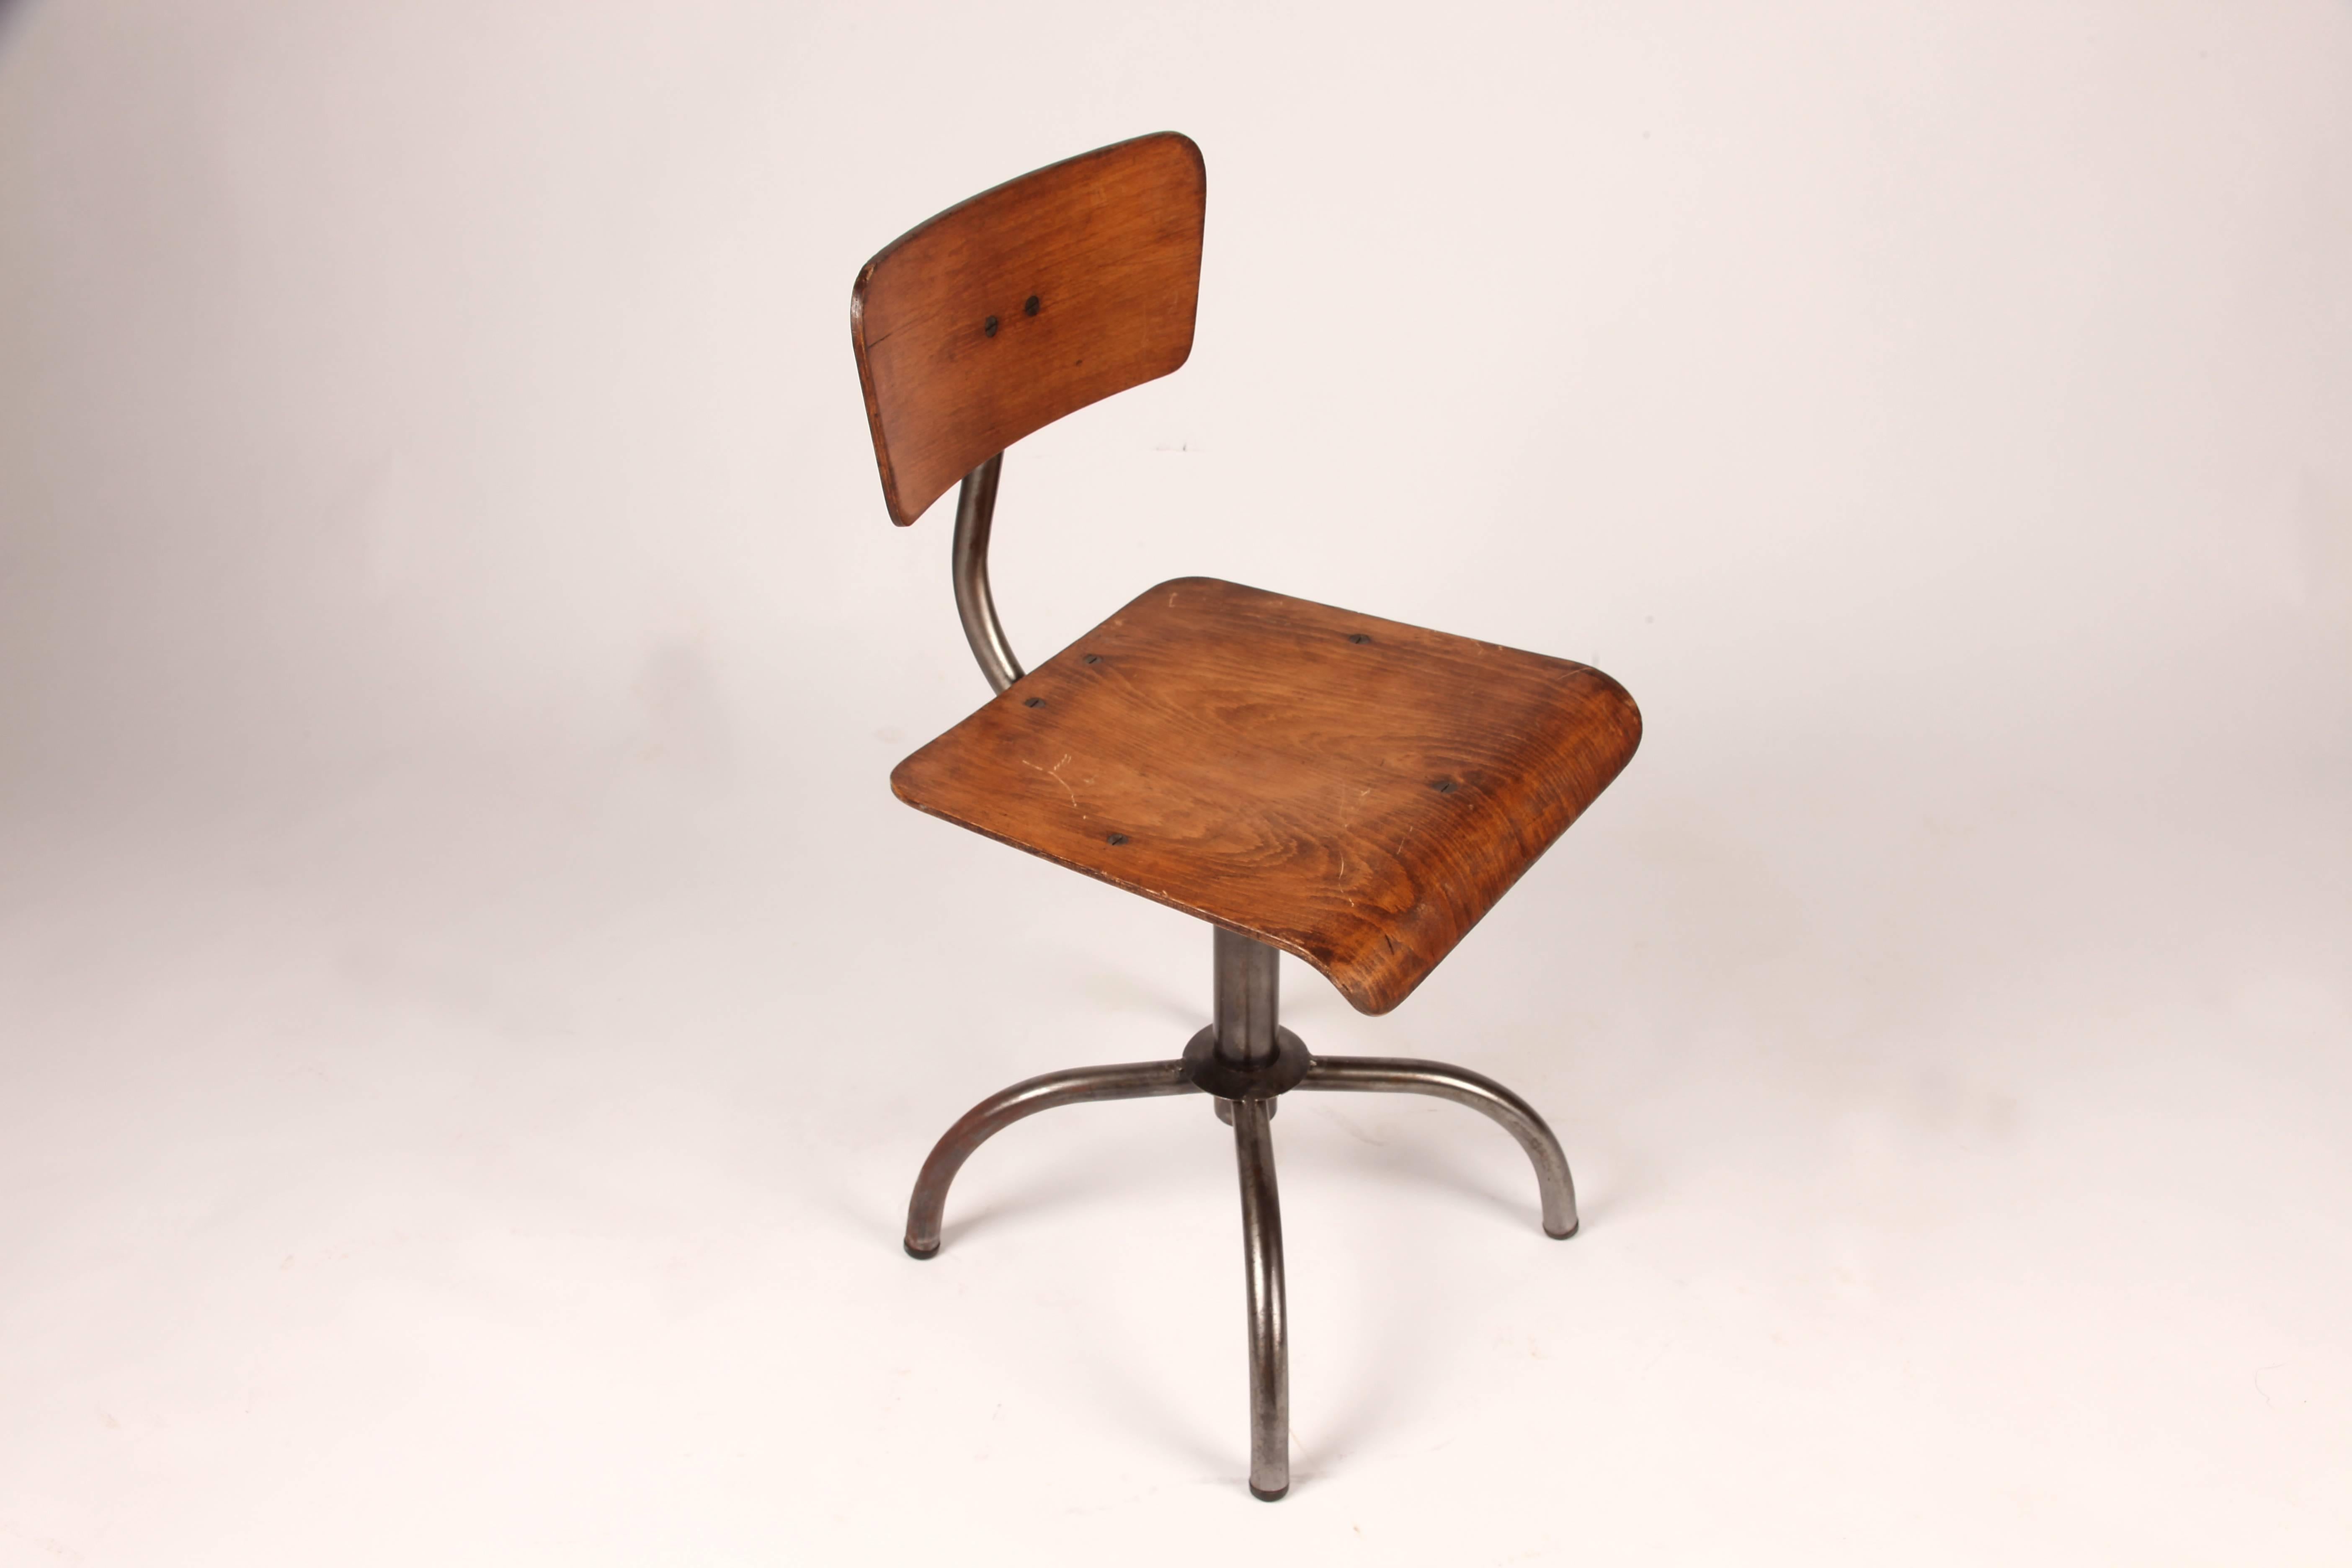 These Industrial chairs are from France and are made from pine wood and metal, circa 1950.